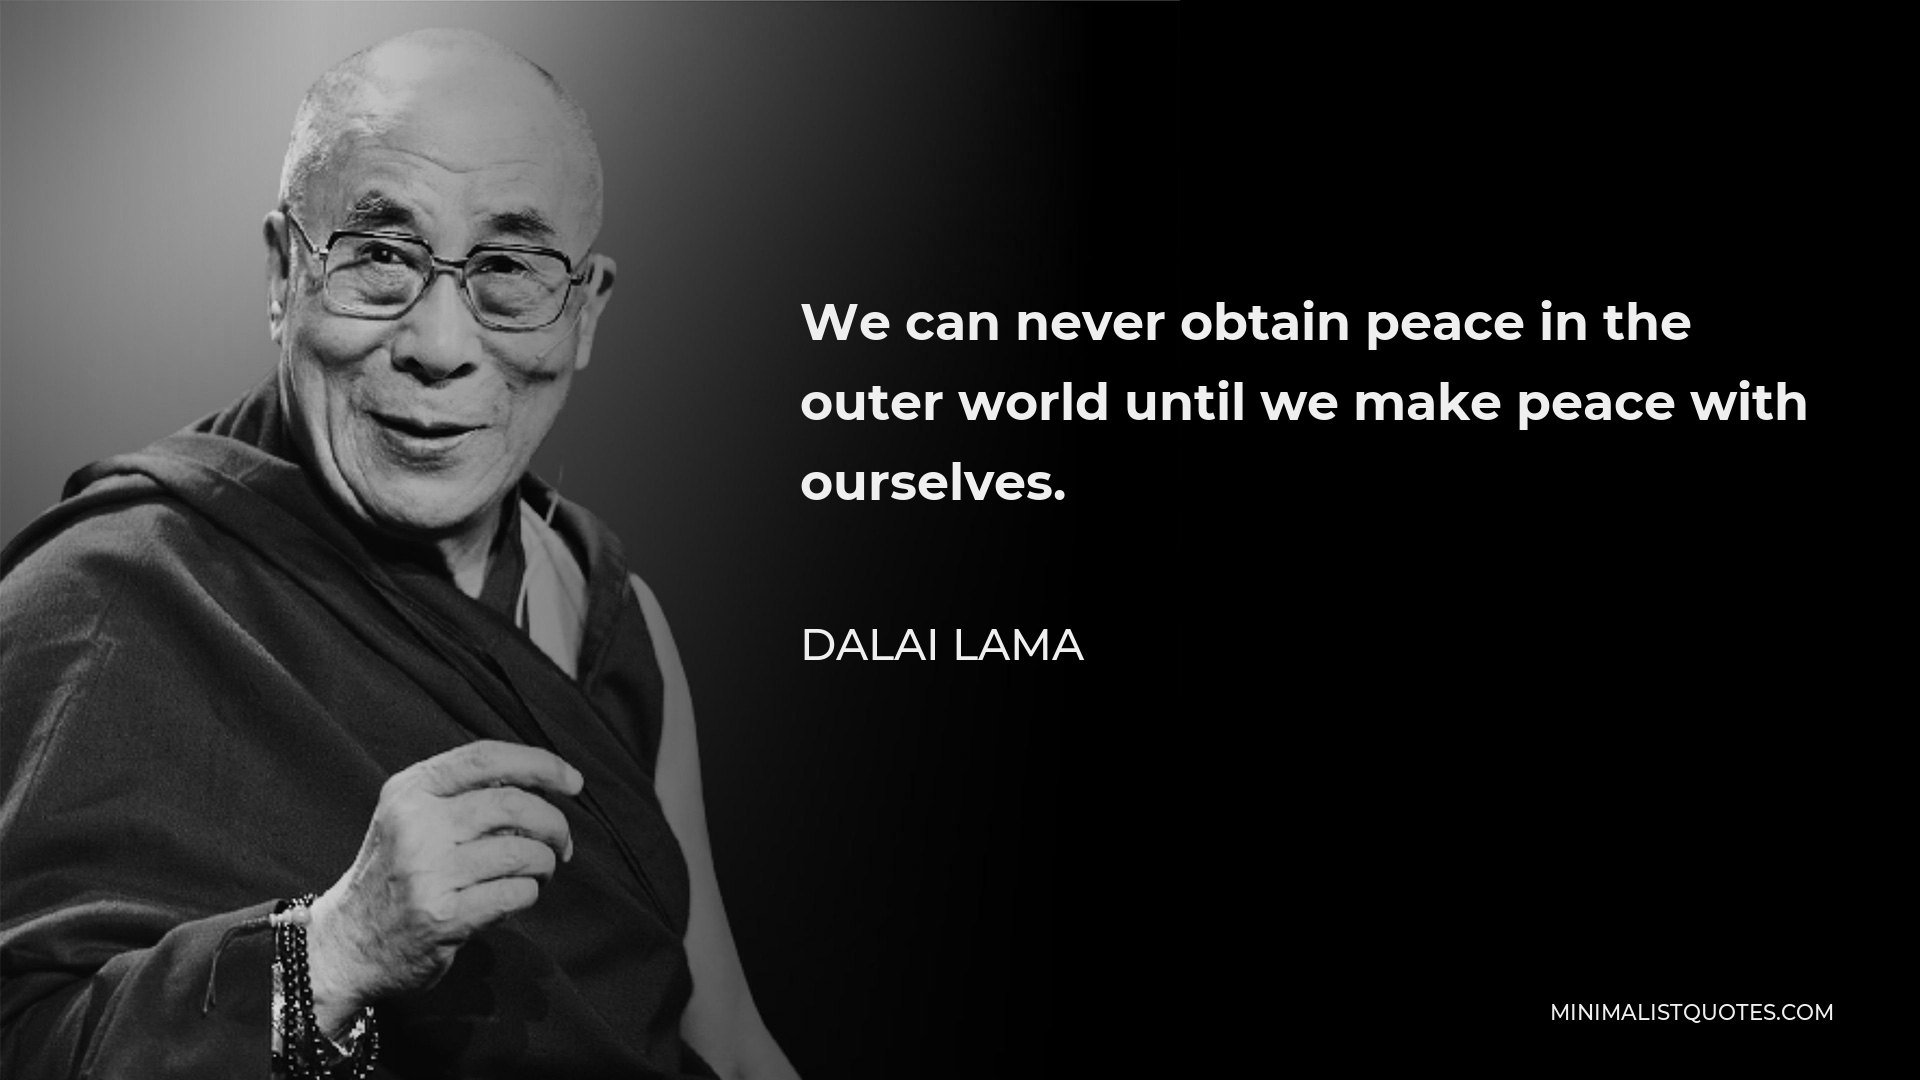 Dalai Lama Quote - We can never obtain peace in the outer world until we make peace with ourselves.